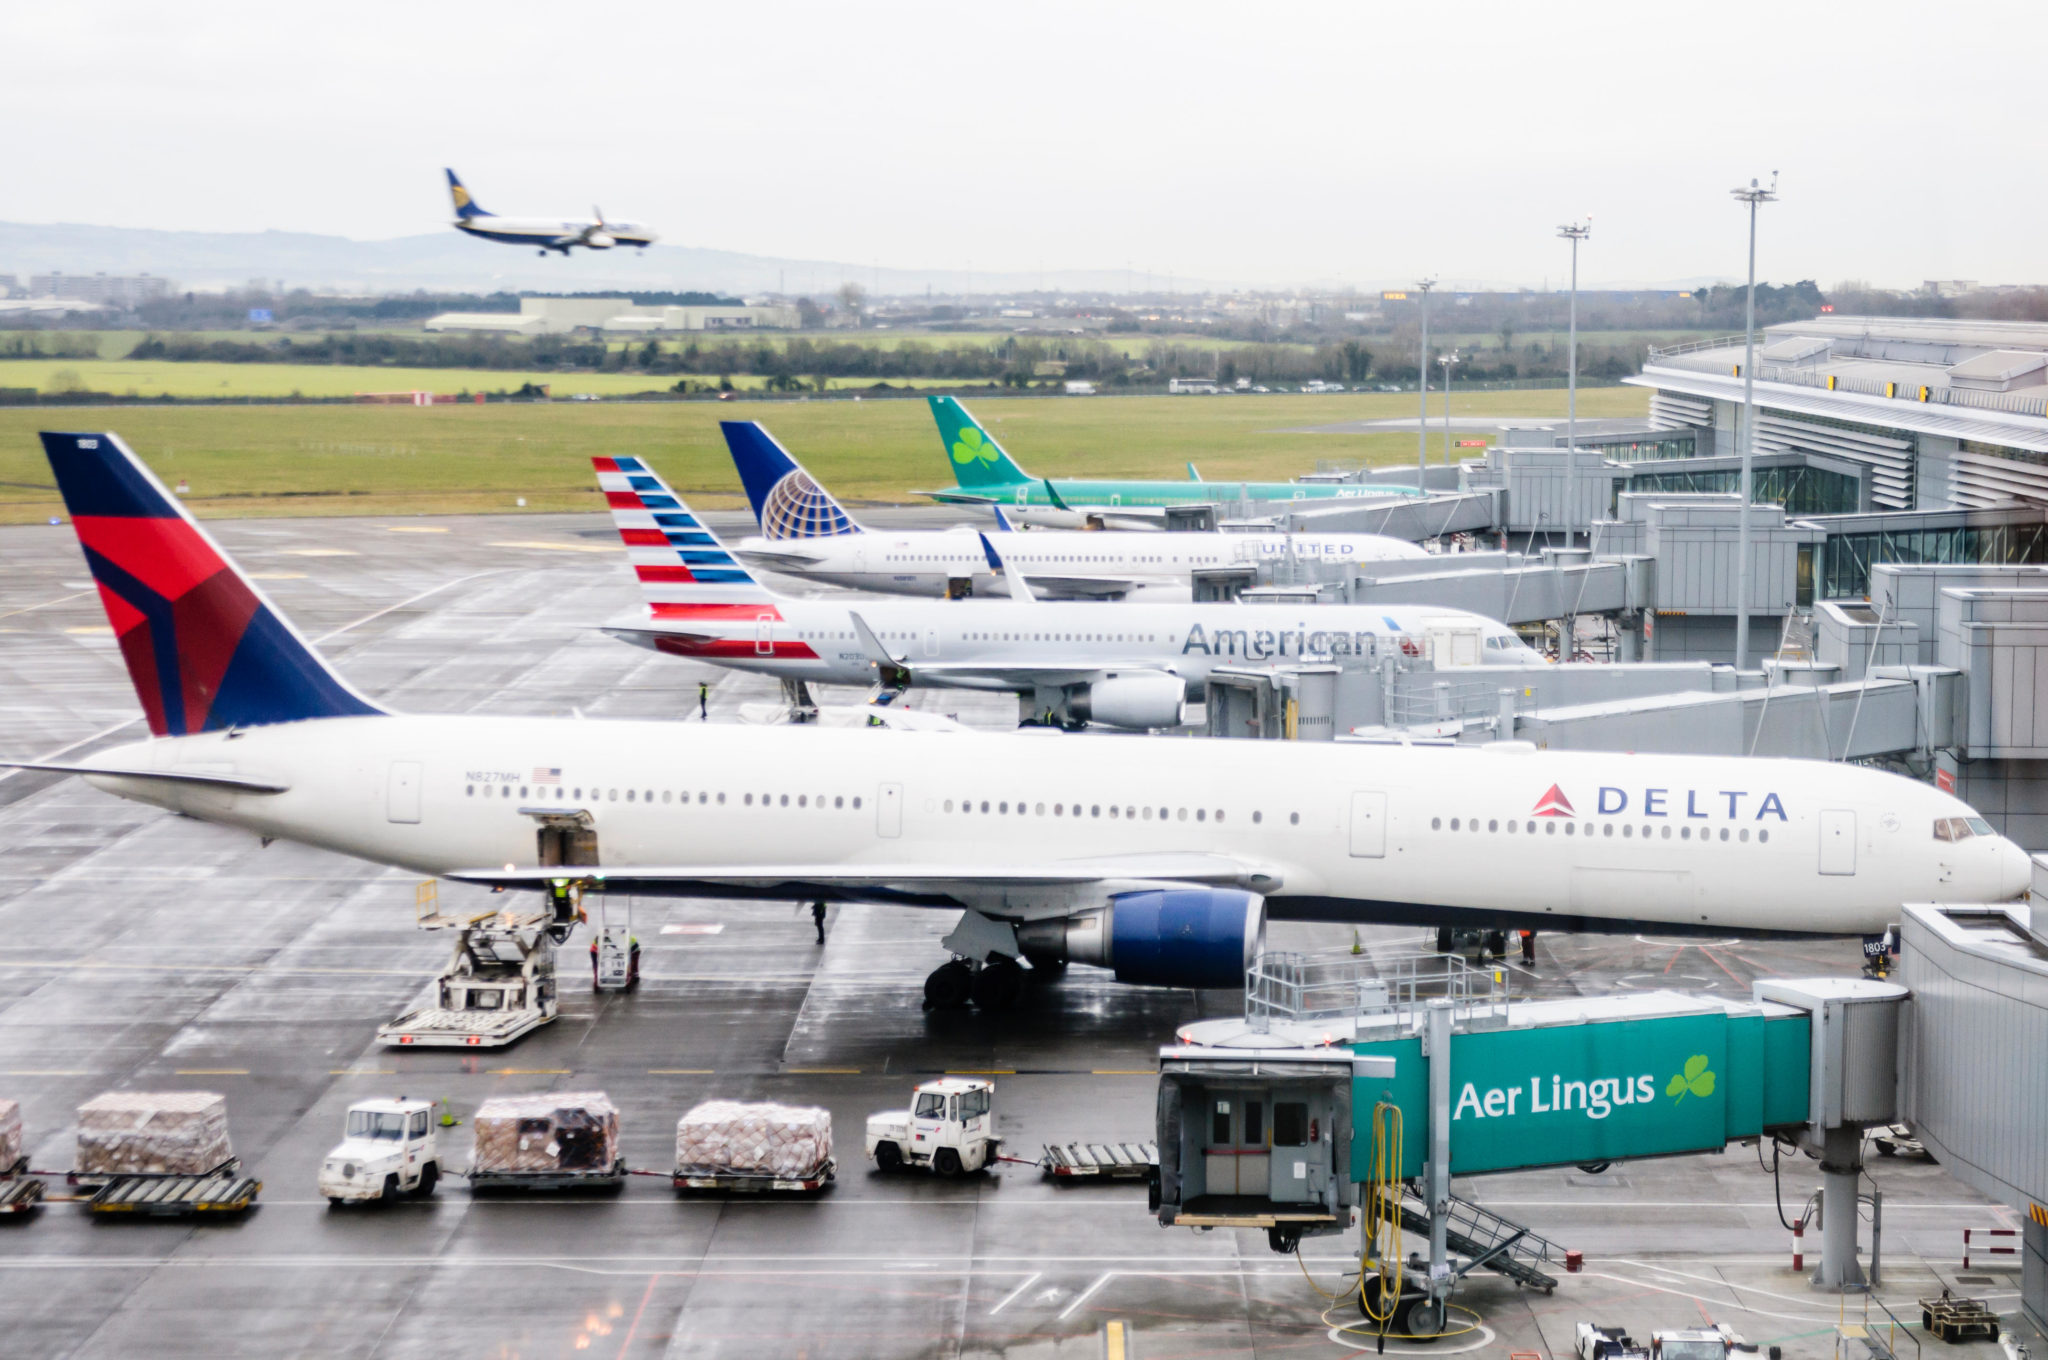 Delta, American and United planes on stand at Dublin Airport. Image: Stephen Barnes/Travel / Alamy Stock Photo